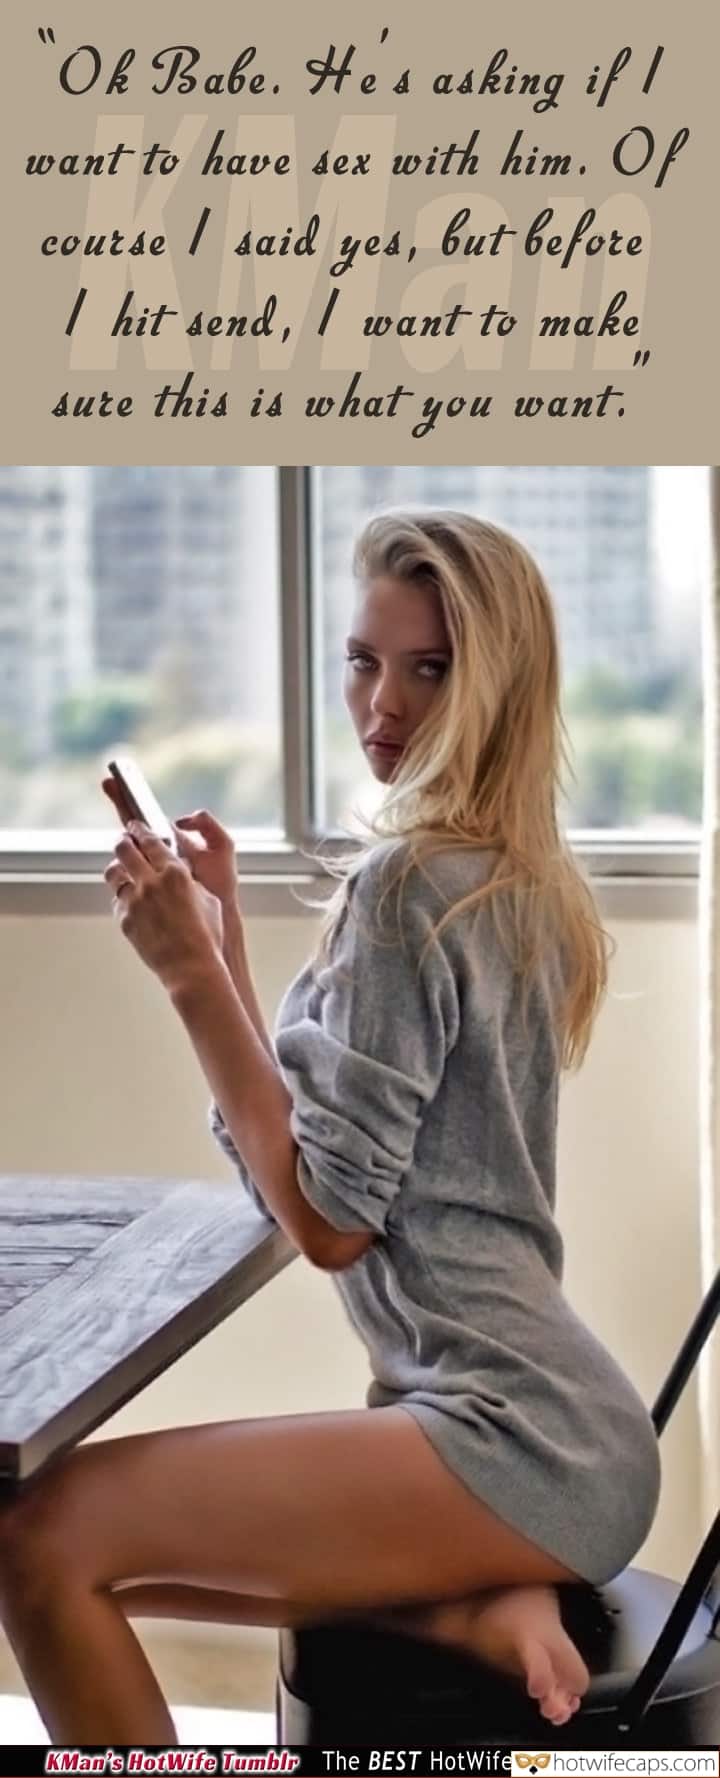 Wife Sharing Sexy Memes Cheating Bully Bull hotwife caption: ‘Ok Babe. He’s asking if I want to have sex with him. Of course, I said yes, but before I hit send, I want to make sure this is what you want. Blonde Sw in Too Short Dress